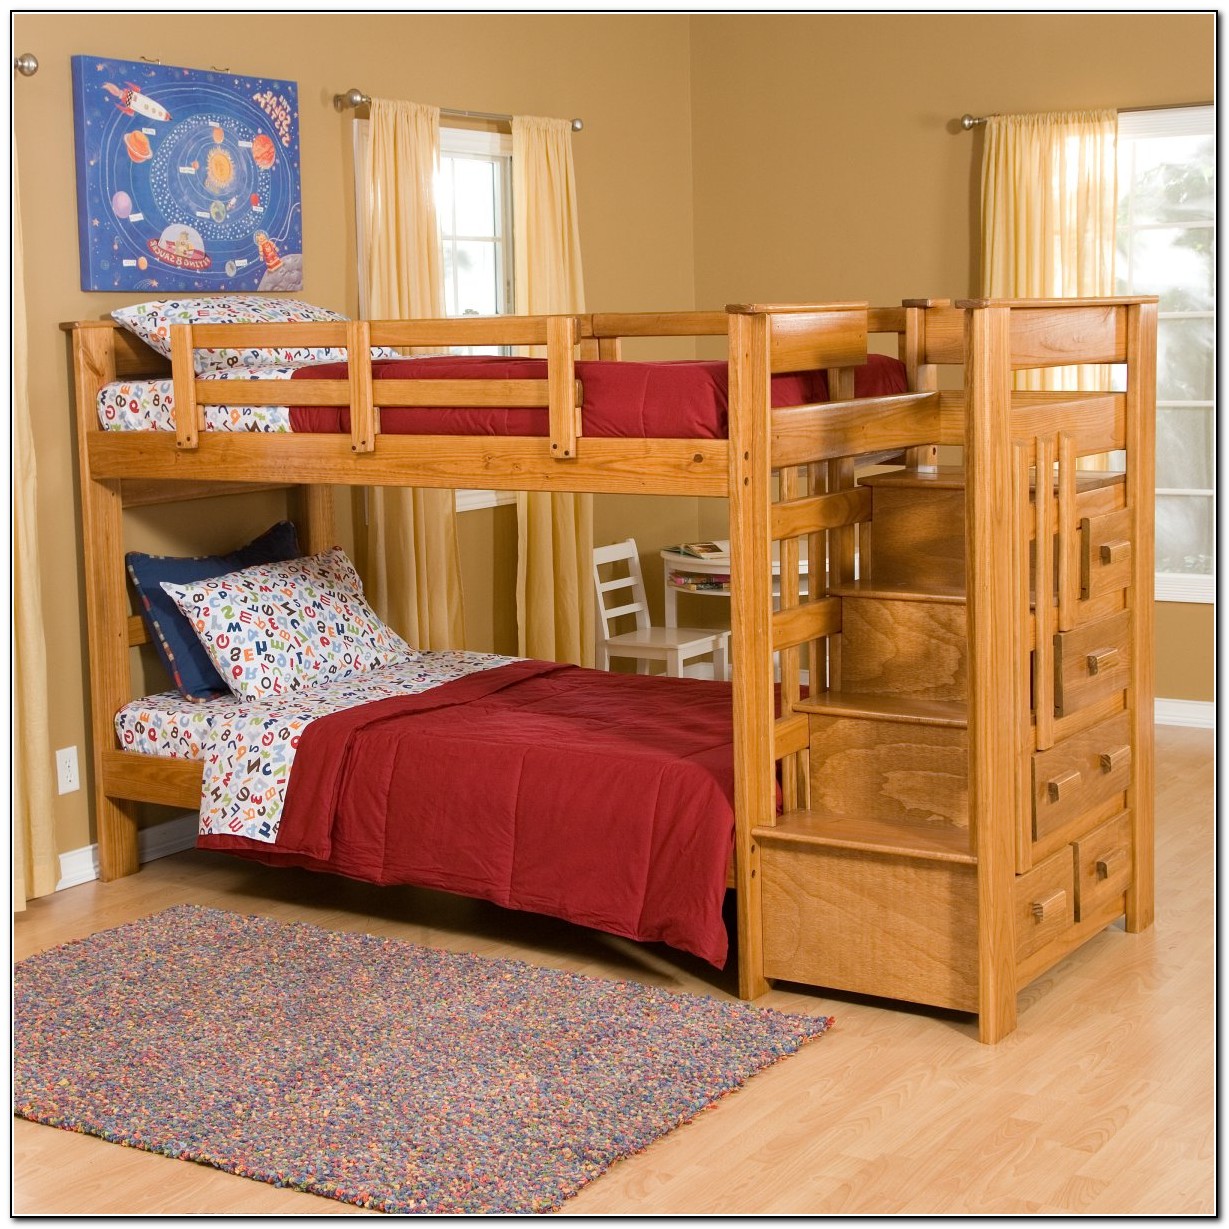 Cheap Bunk Beds With Stairs Beds Home Design Ideas a8D7rOenOg3689